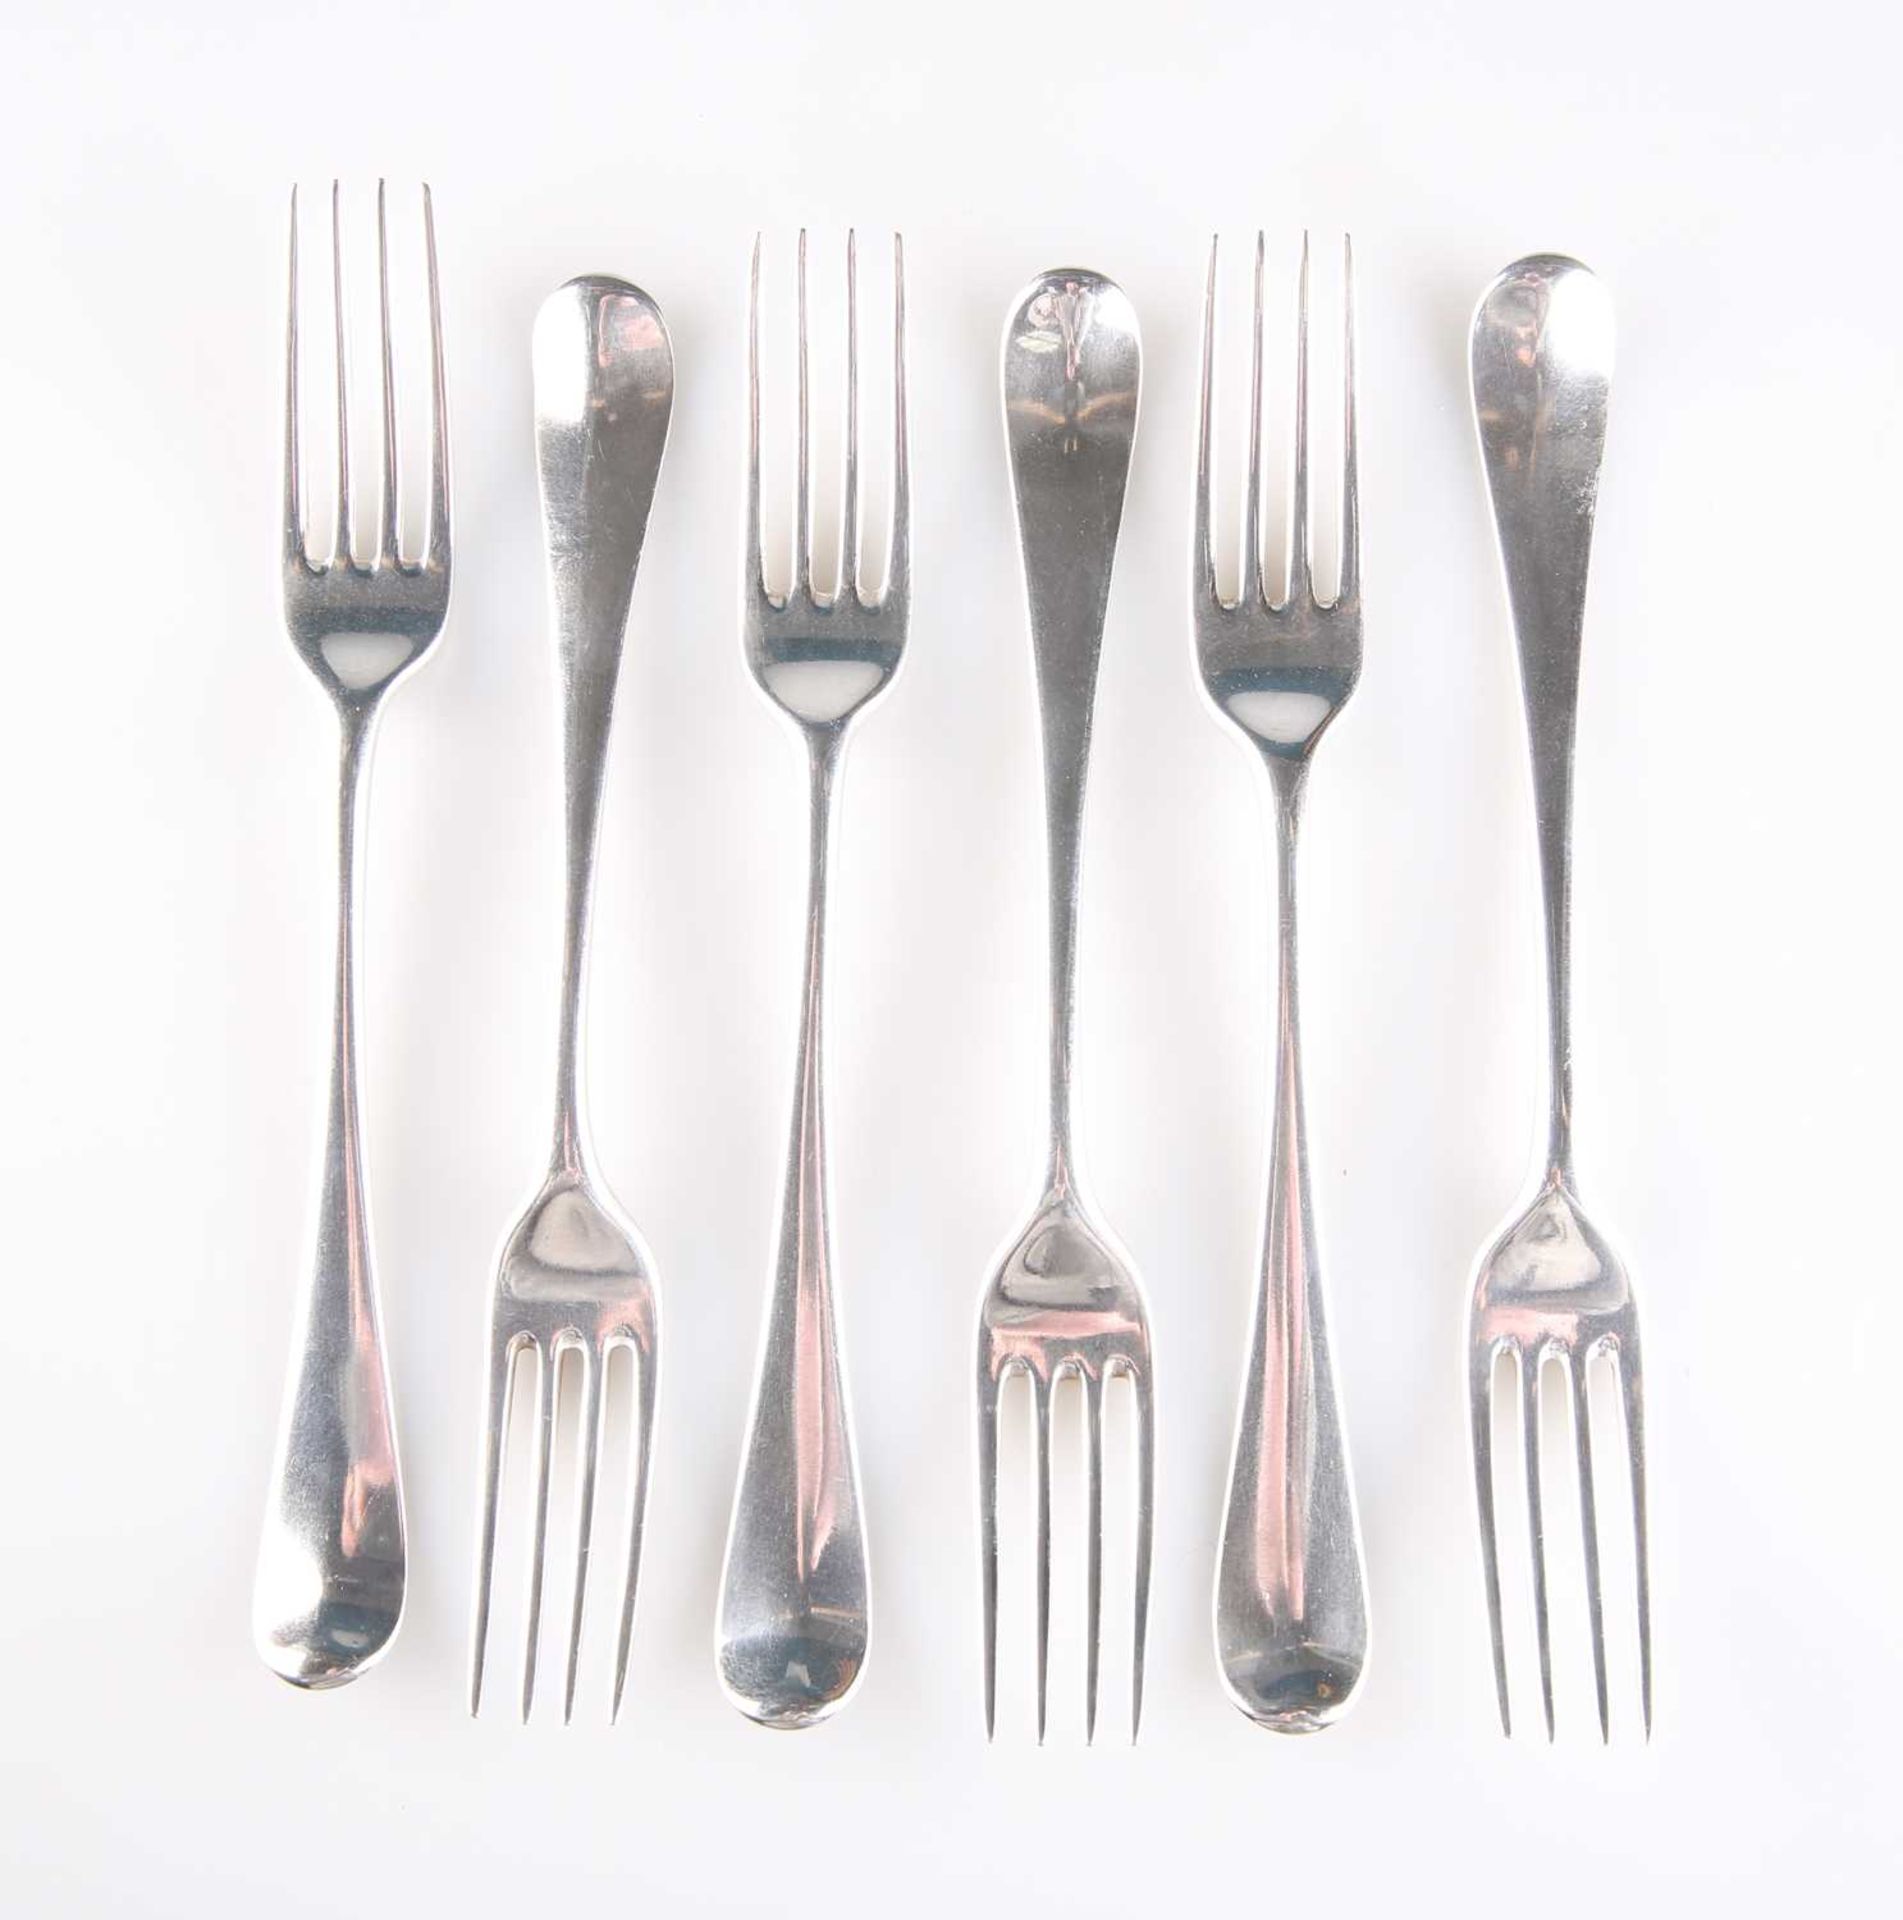 SIX GEORGE III OLD ENGLISH PATTERN SILVER TABLE FORKS